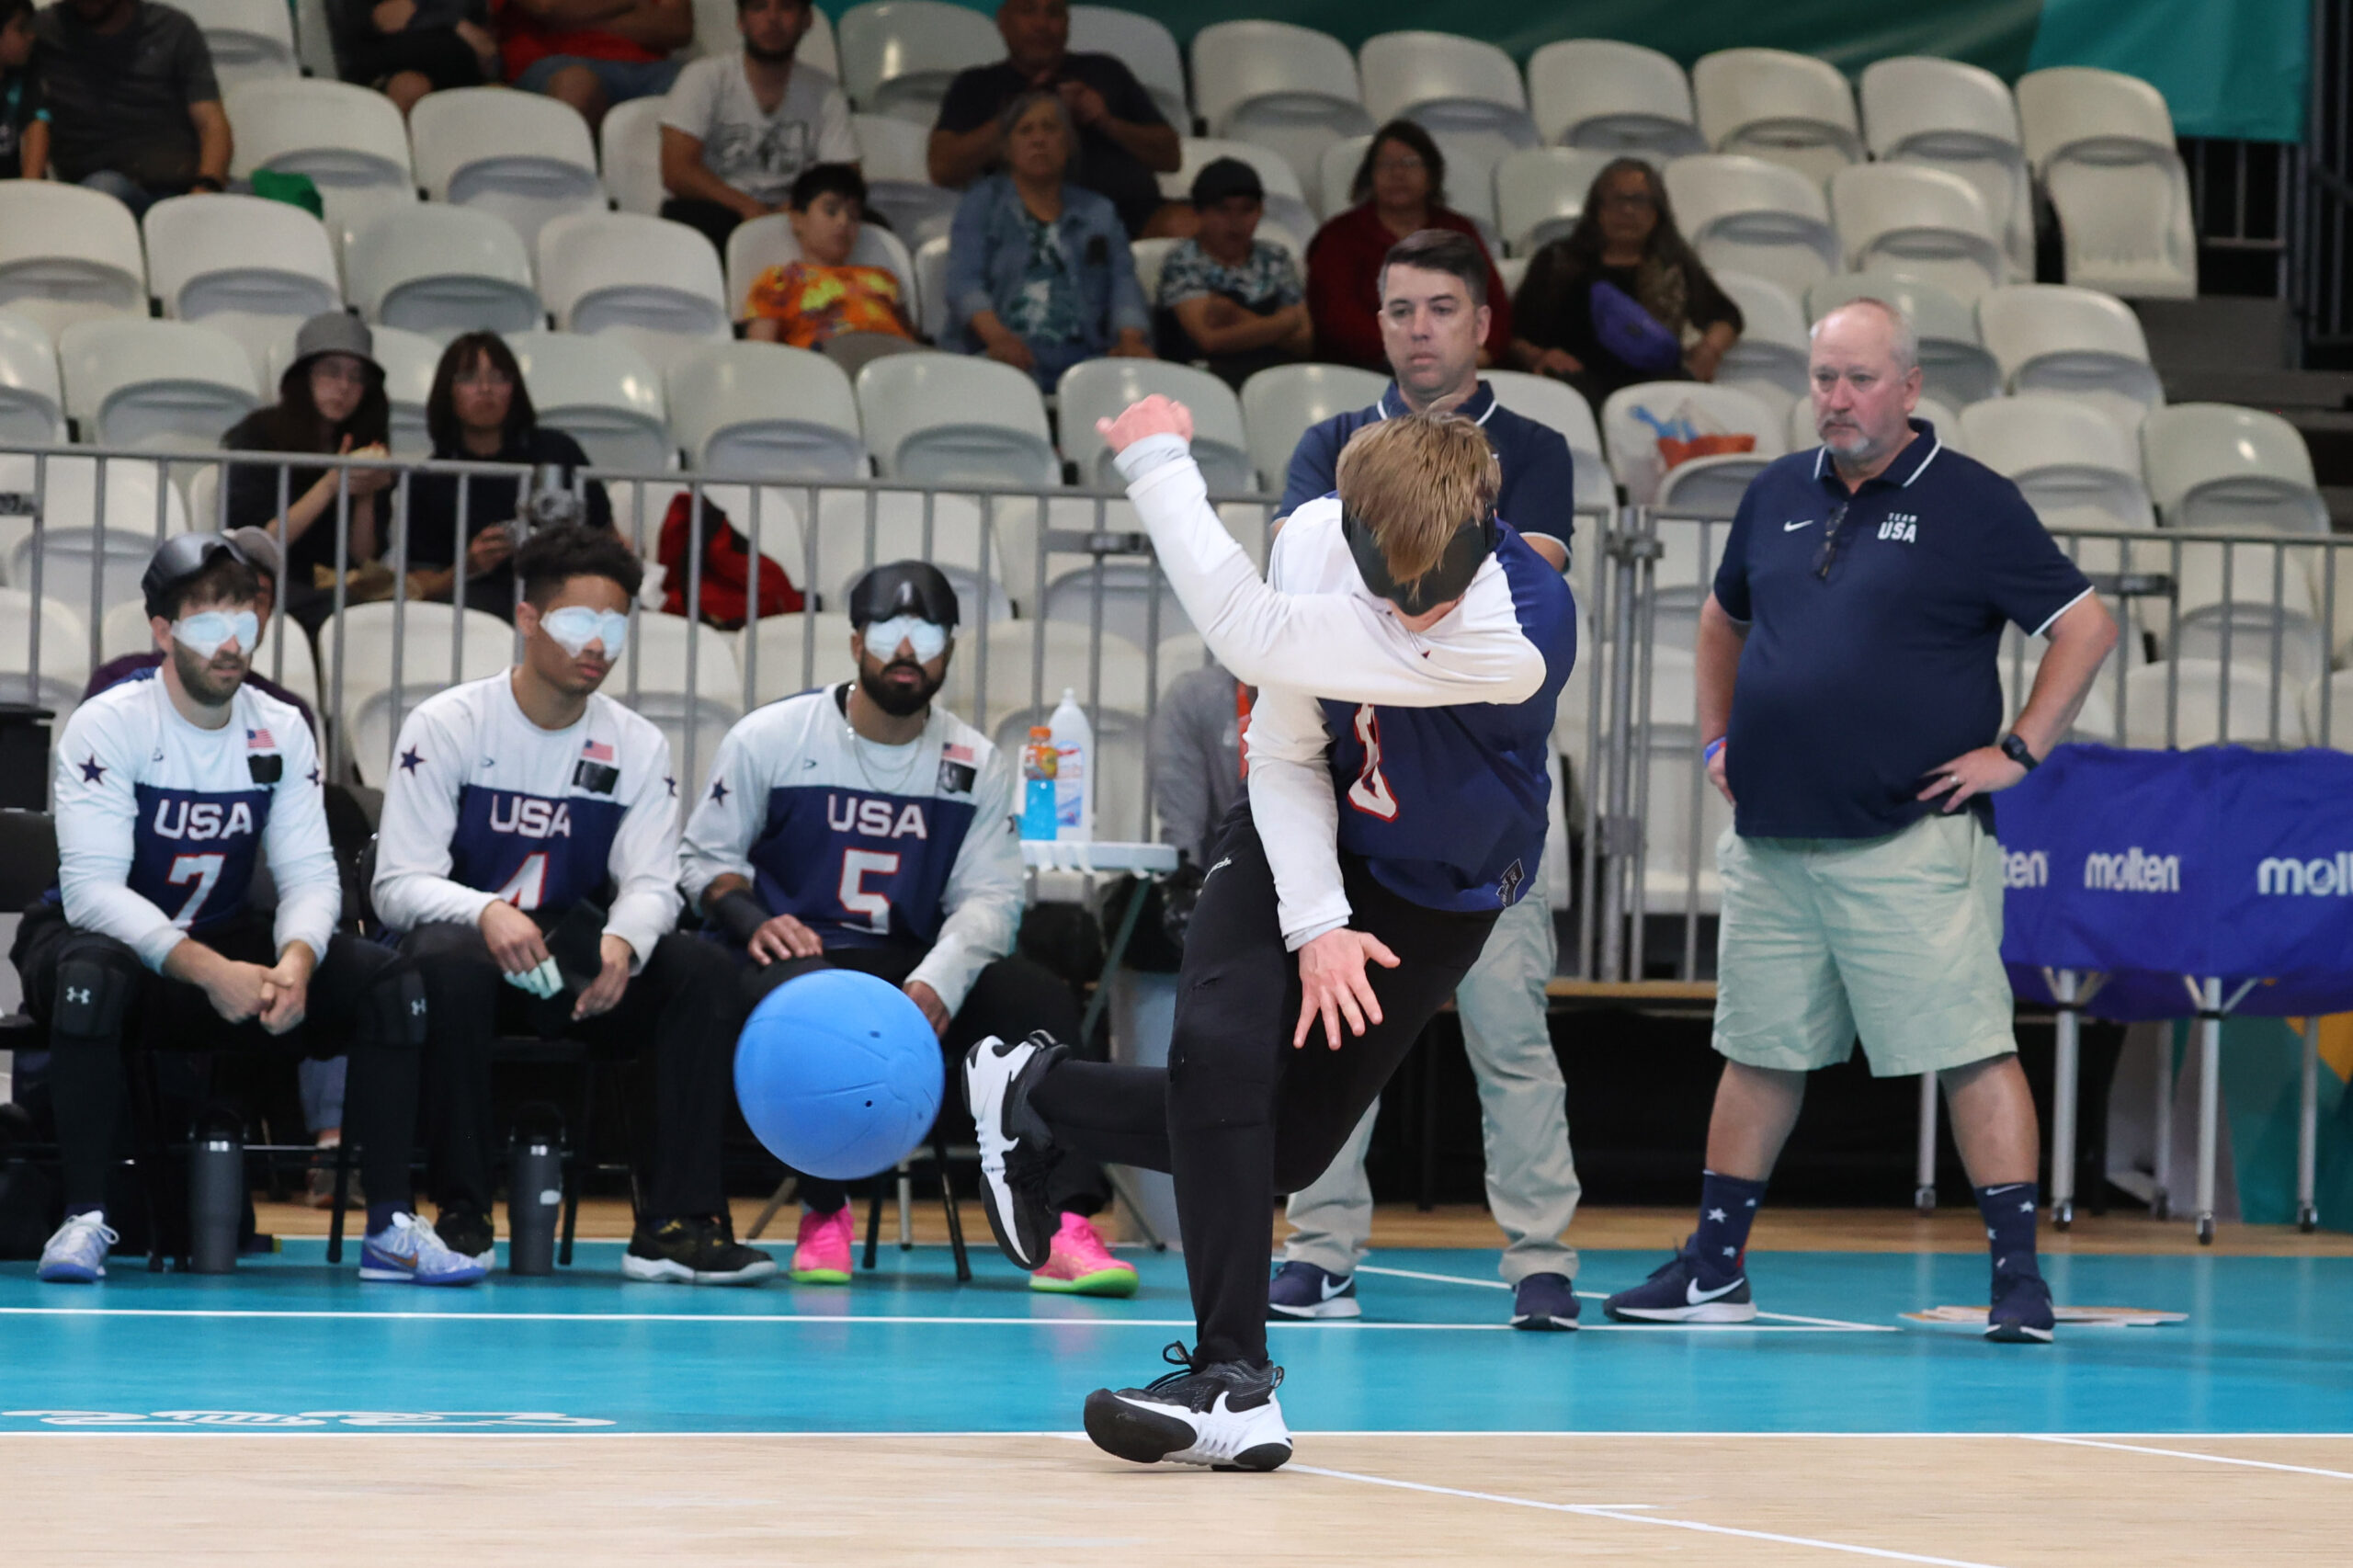 Goalball: The moment of truth for Brazil, Canada and the United States of America